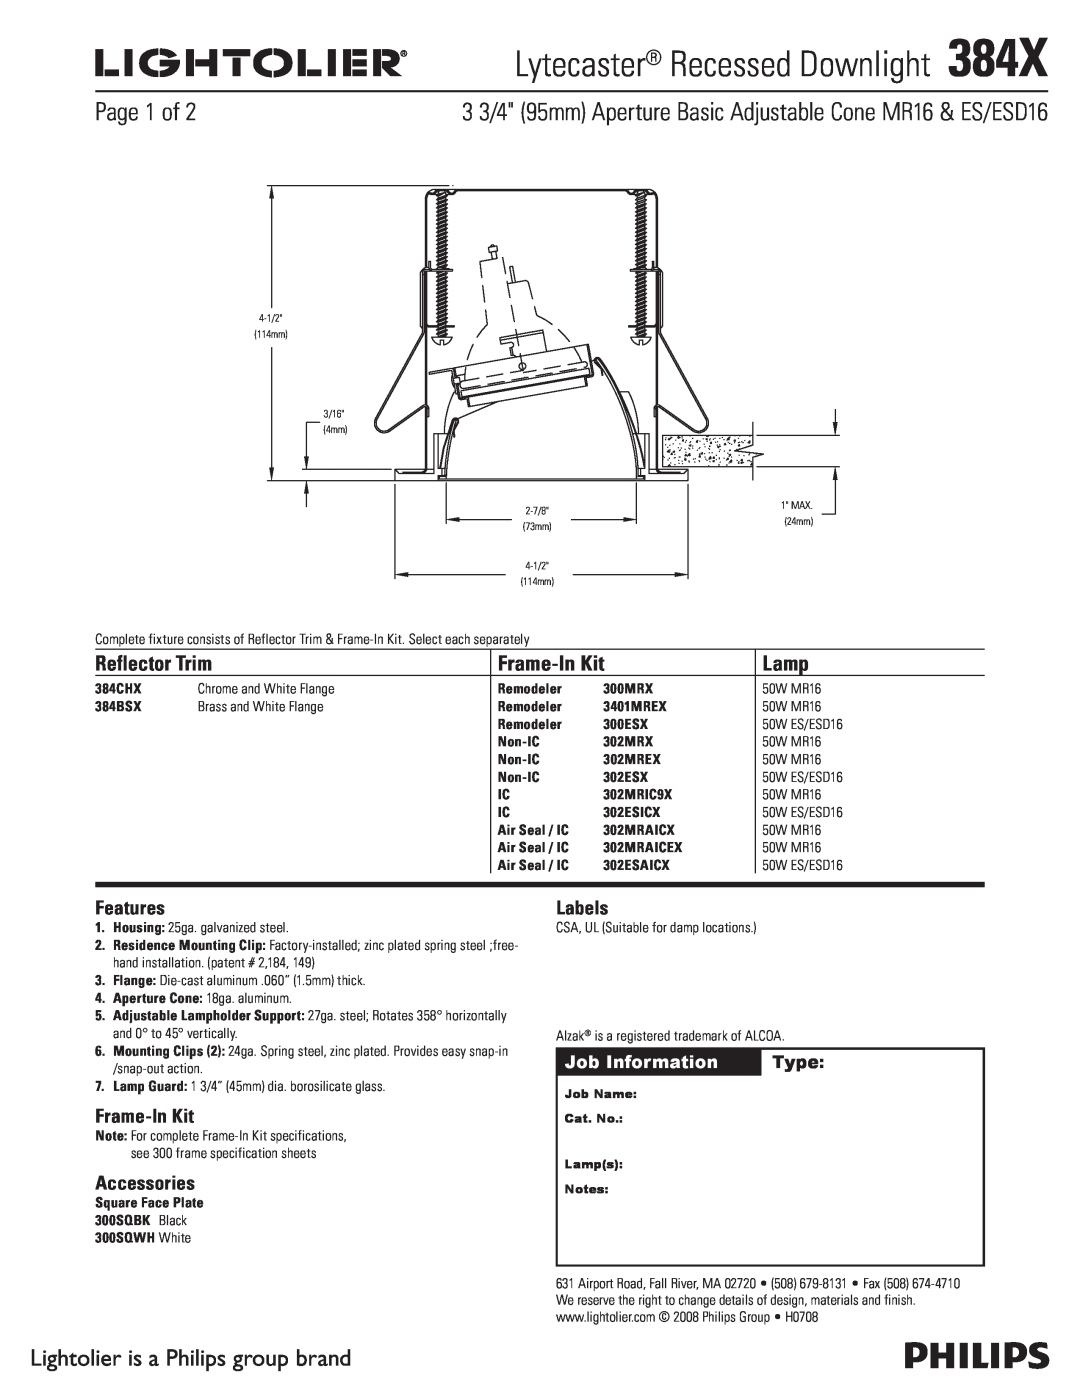 Lightolier 384X specifications Page 1 of, Lightolier is a Philips group brand, Job Information, Type, Reflector Trim, Lamp 